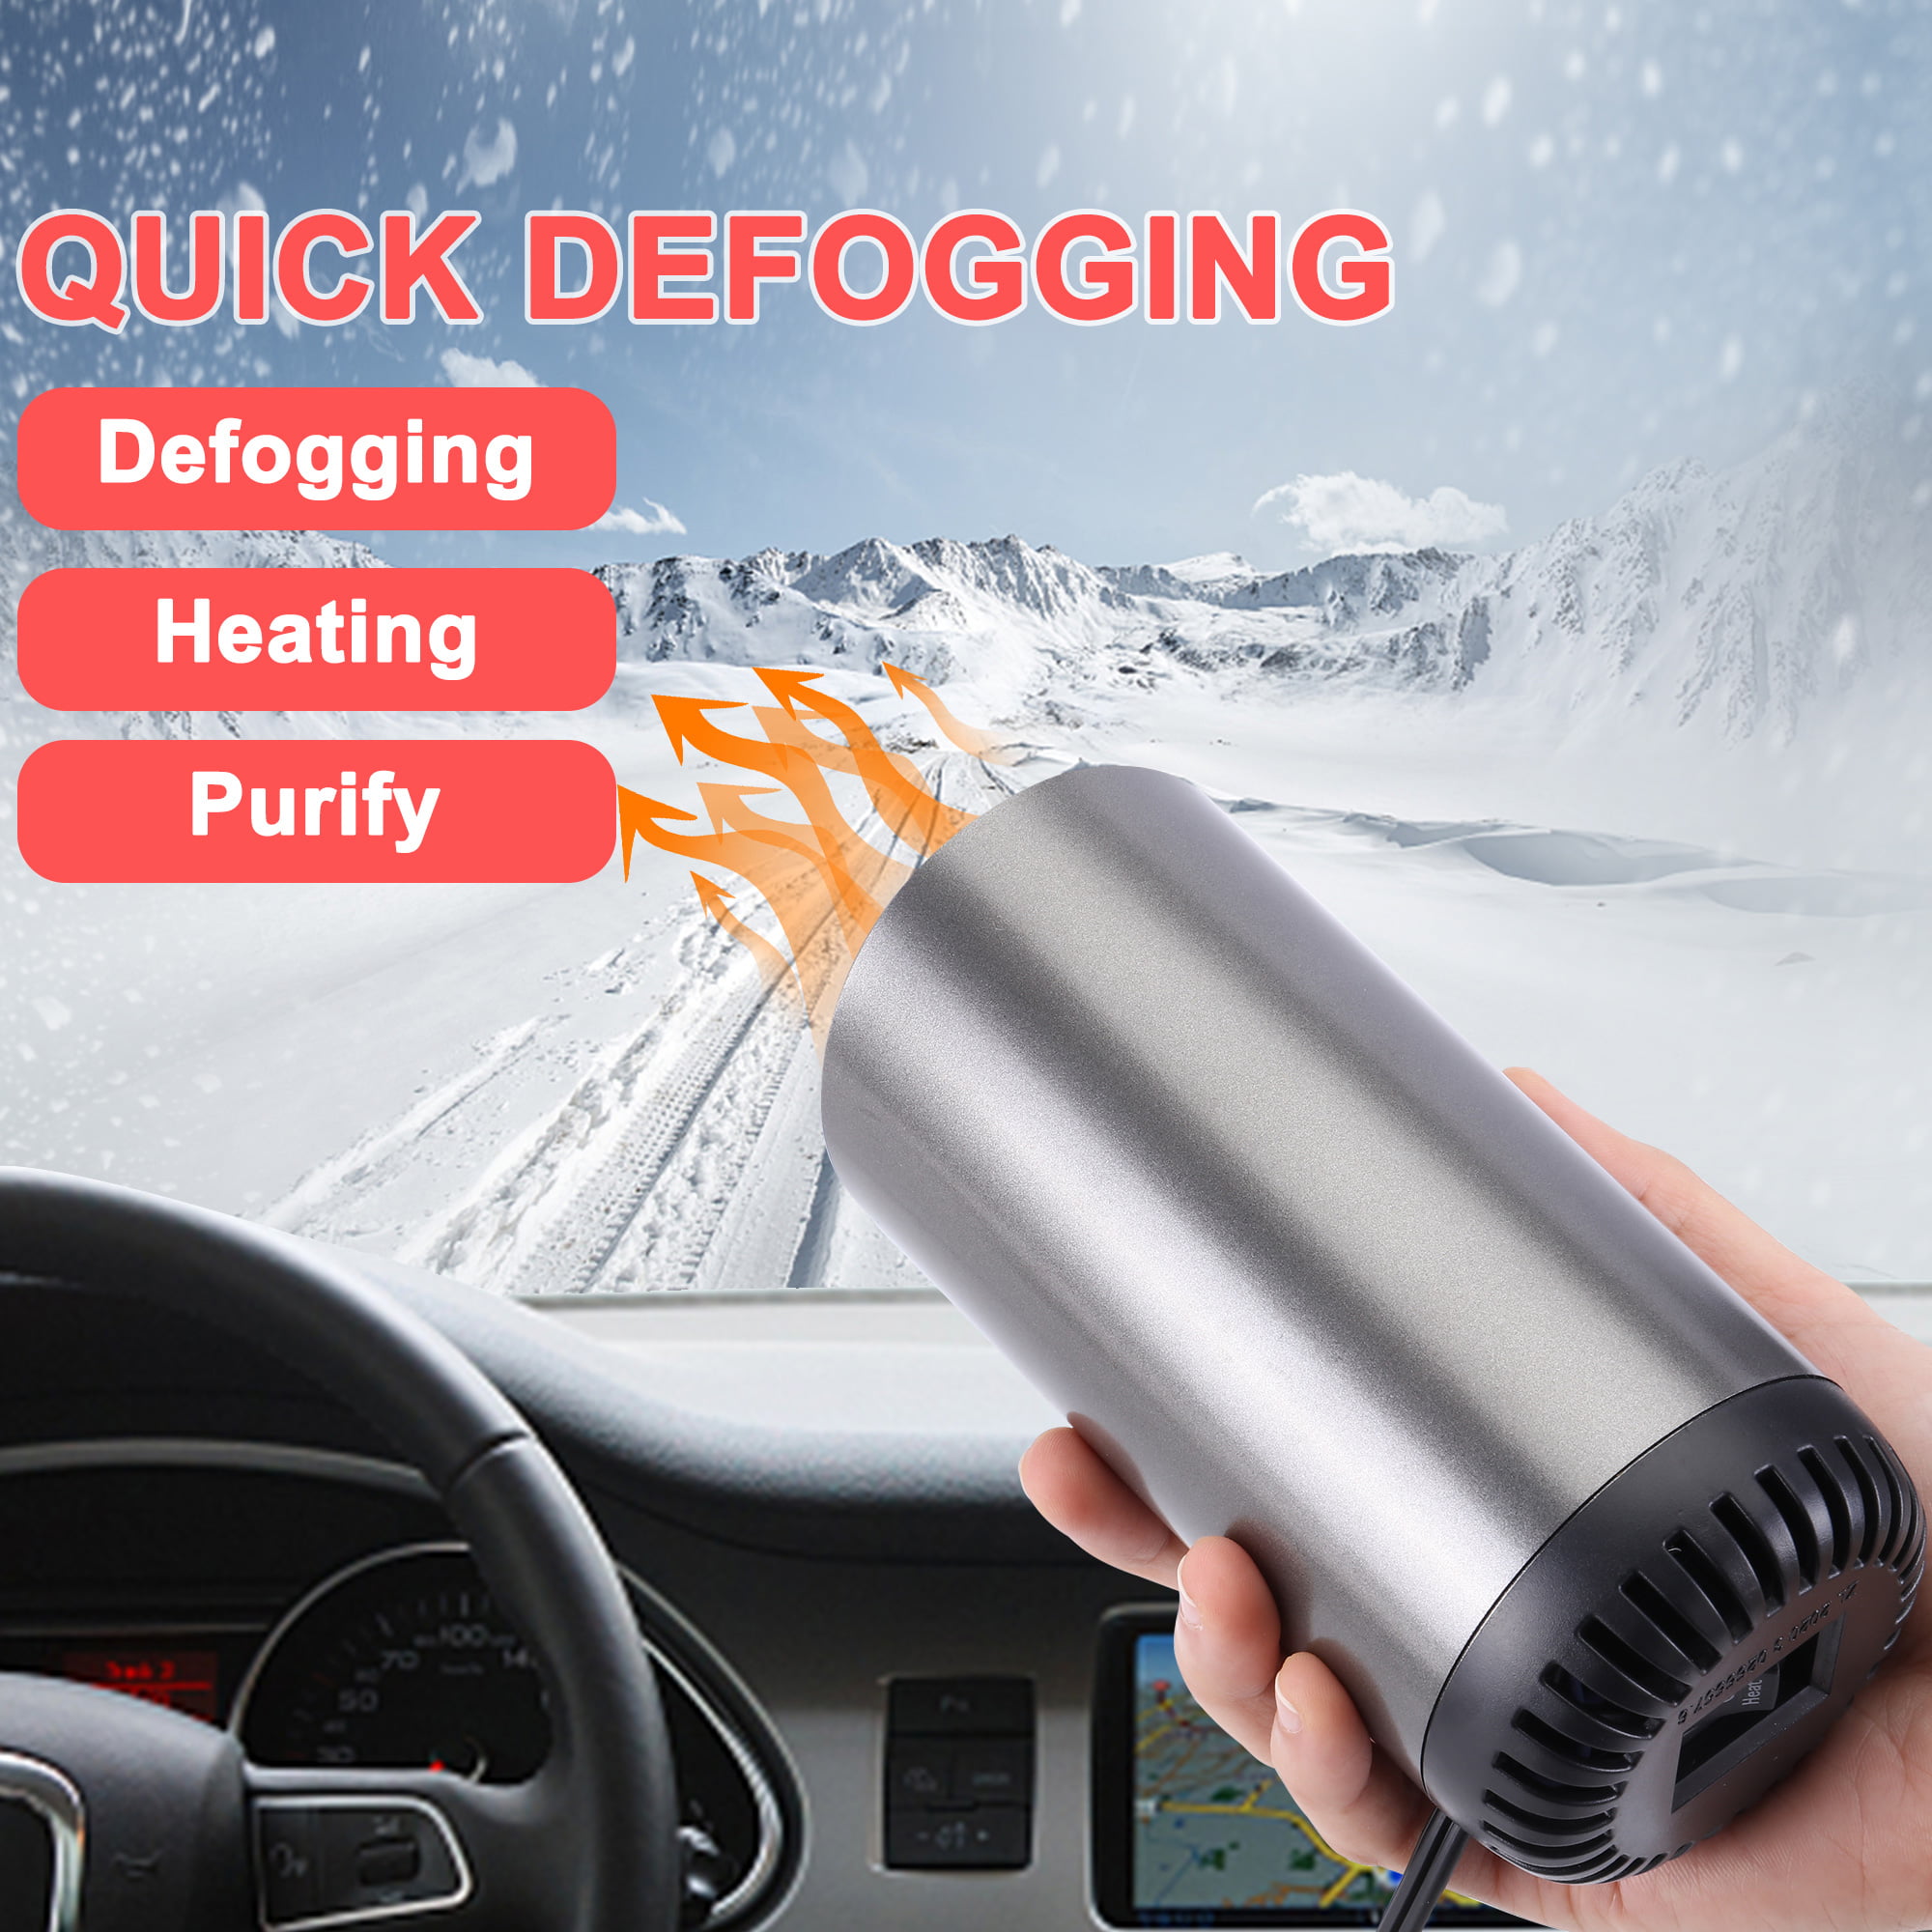 Car Heater Defroster - 12V Fast Heating Defrost Defogger for Car  Windshield, 150W Portable Car Heaters That Plugs into Cigarette Lighter  with 180°